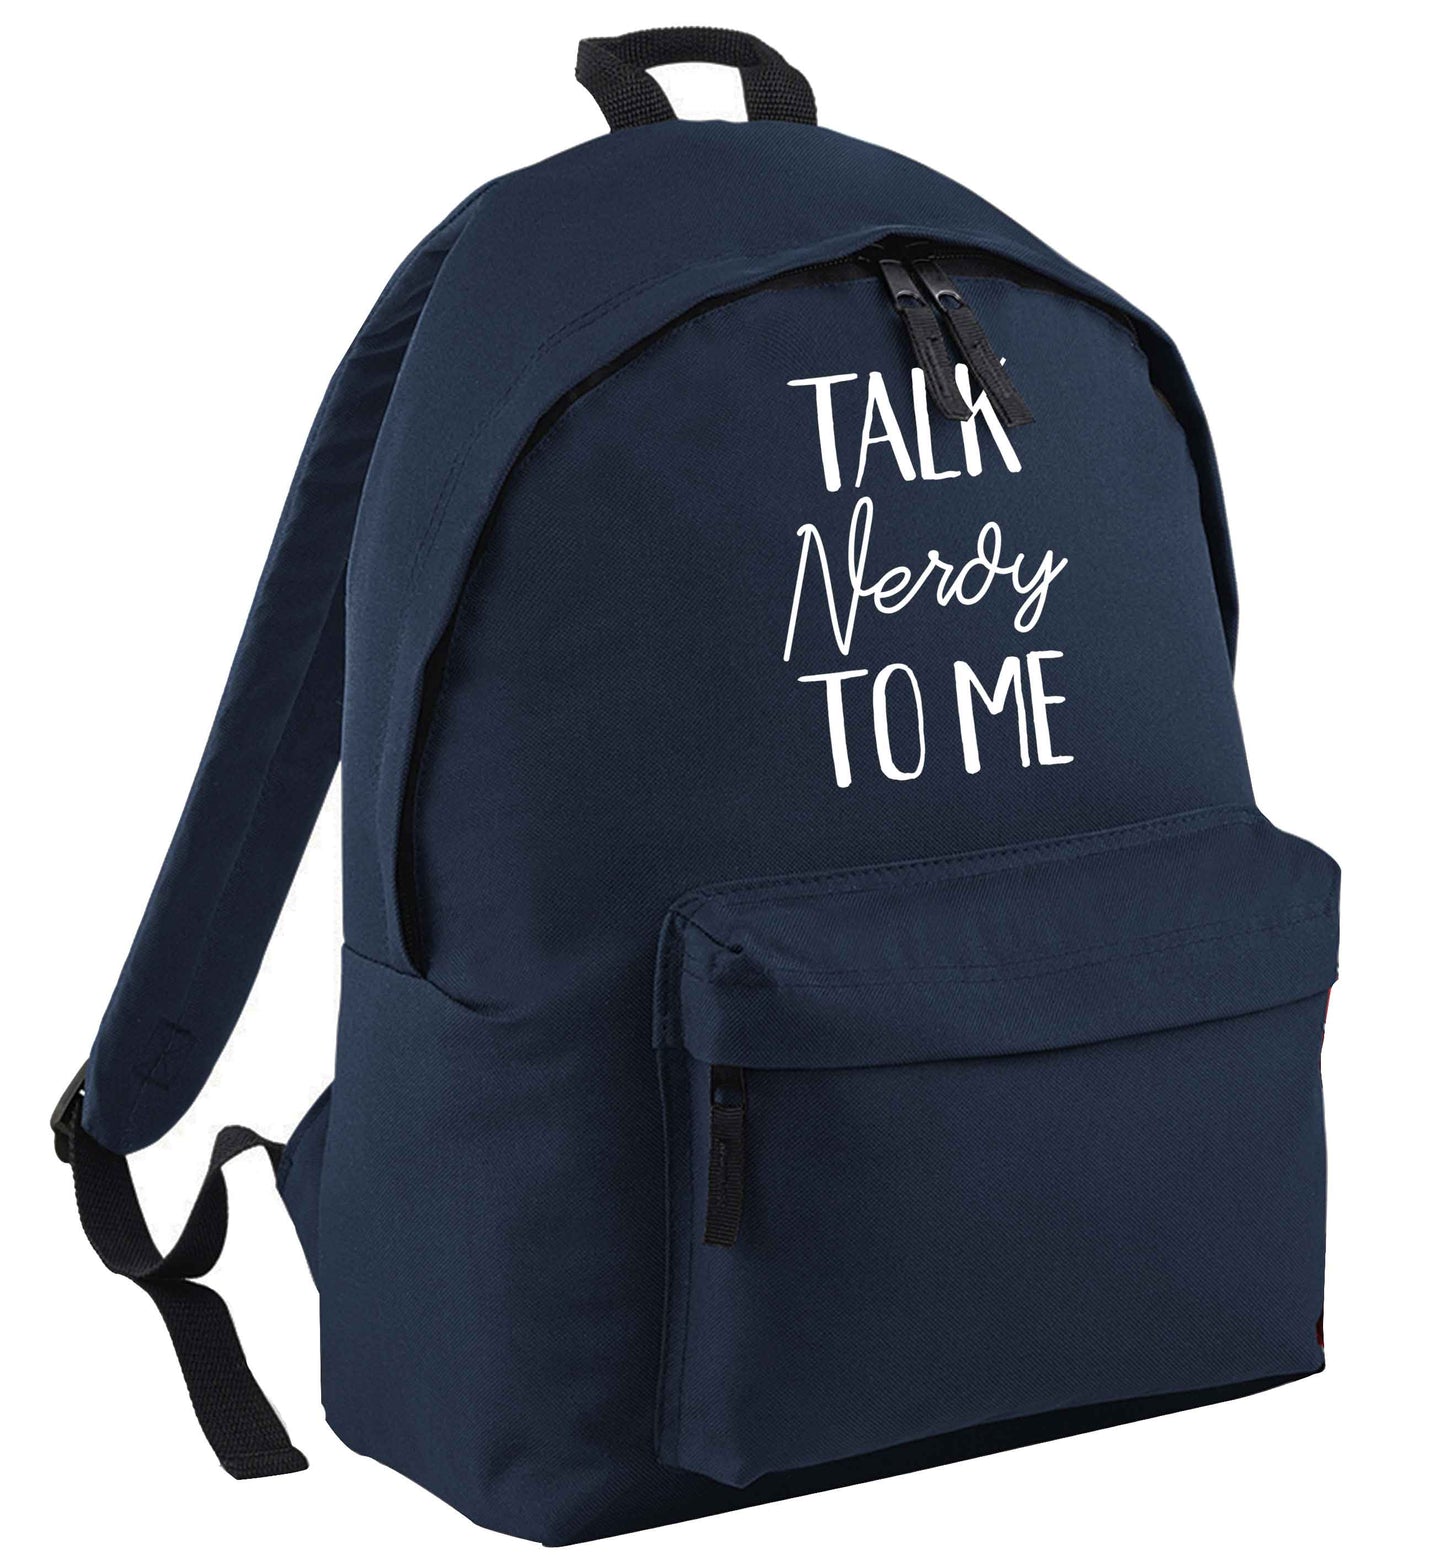 Talk nerdy to me navy adults backpack